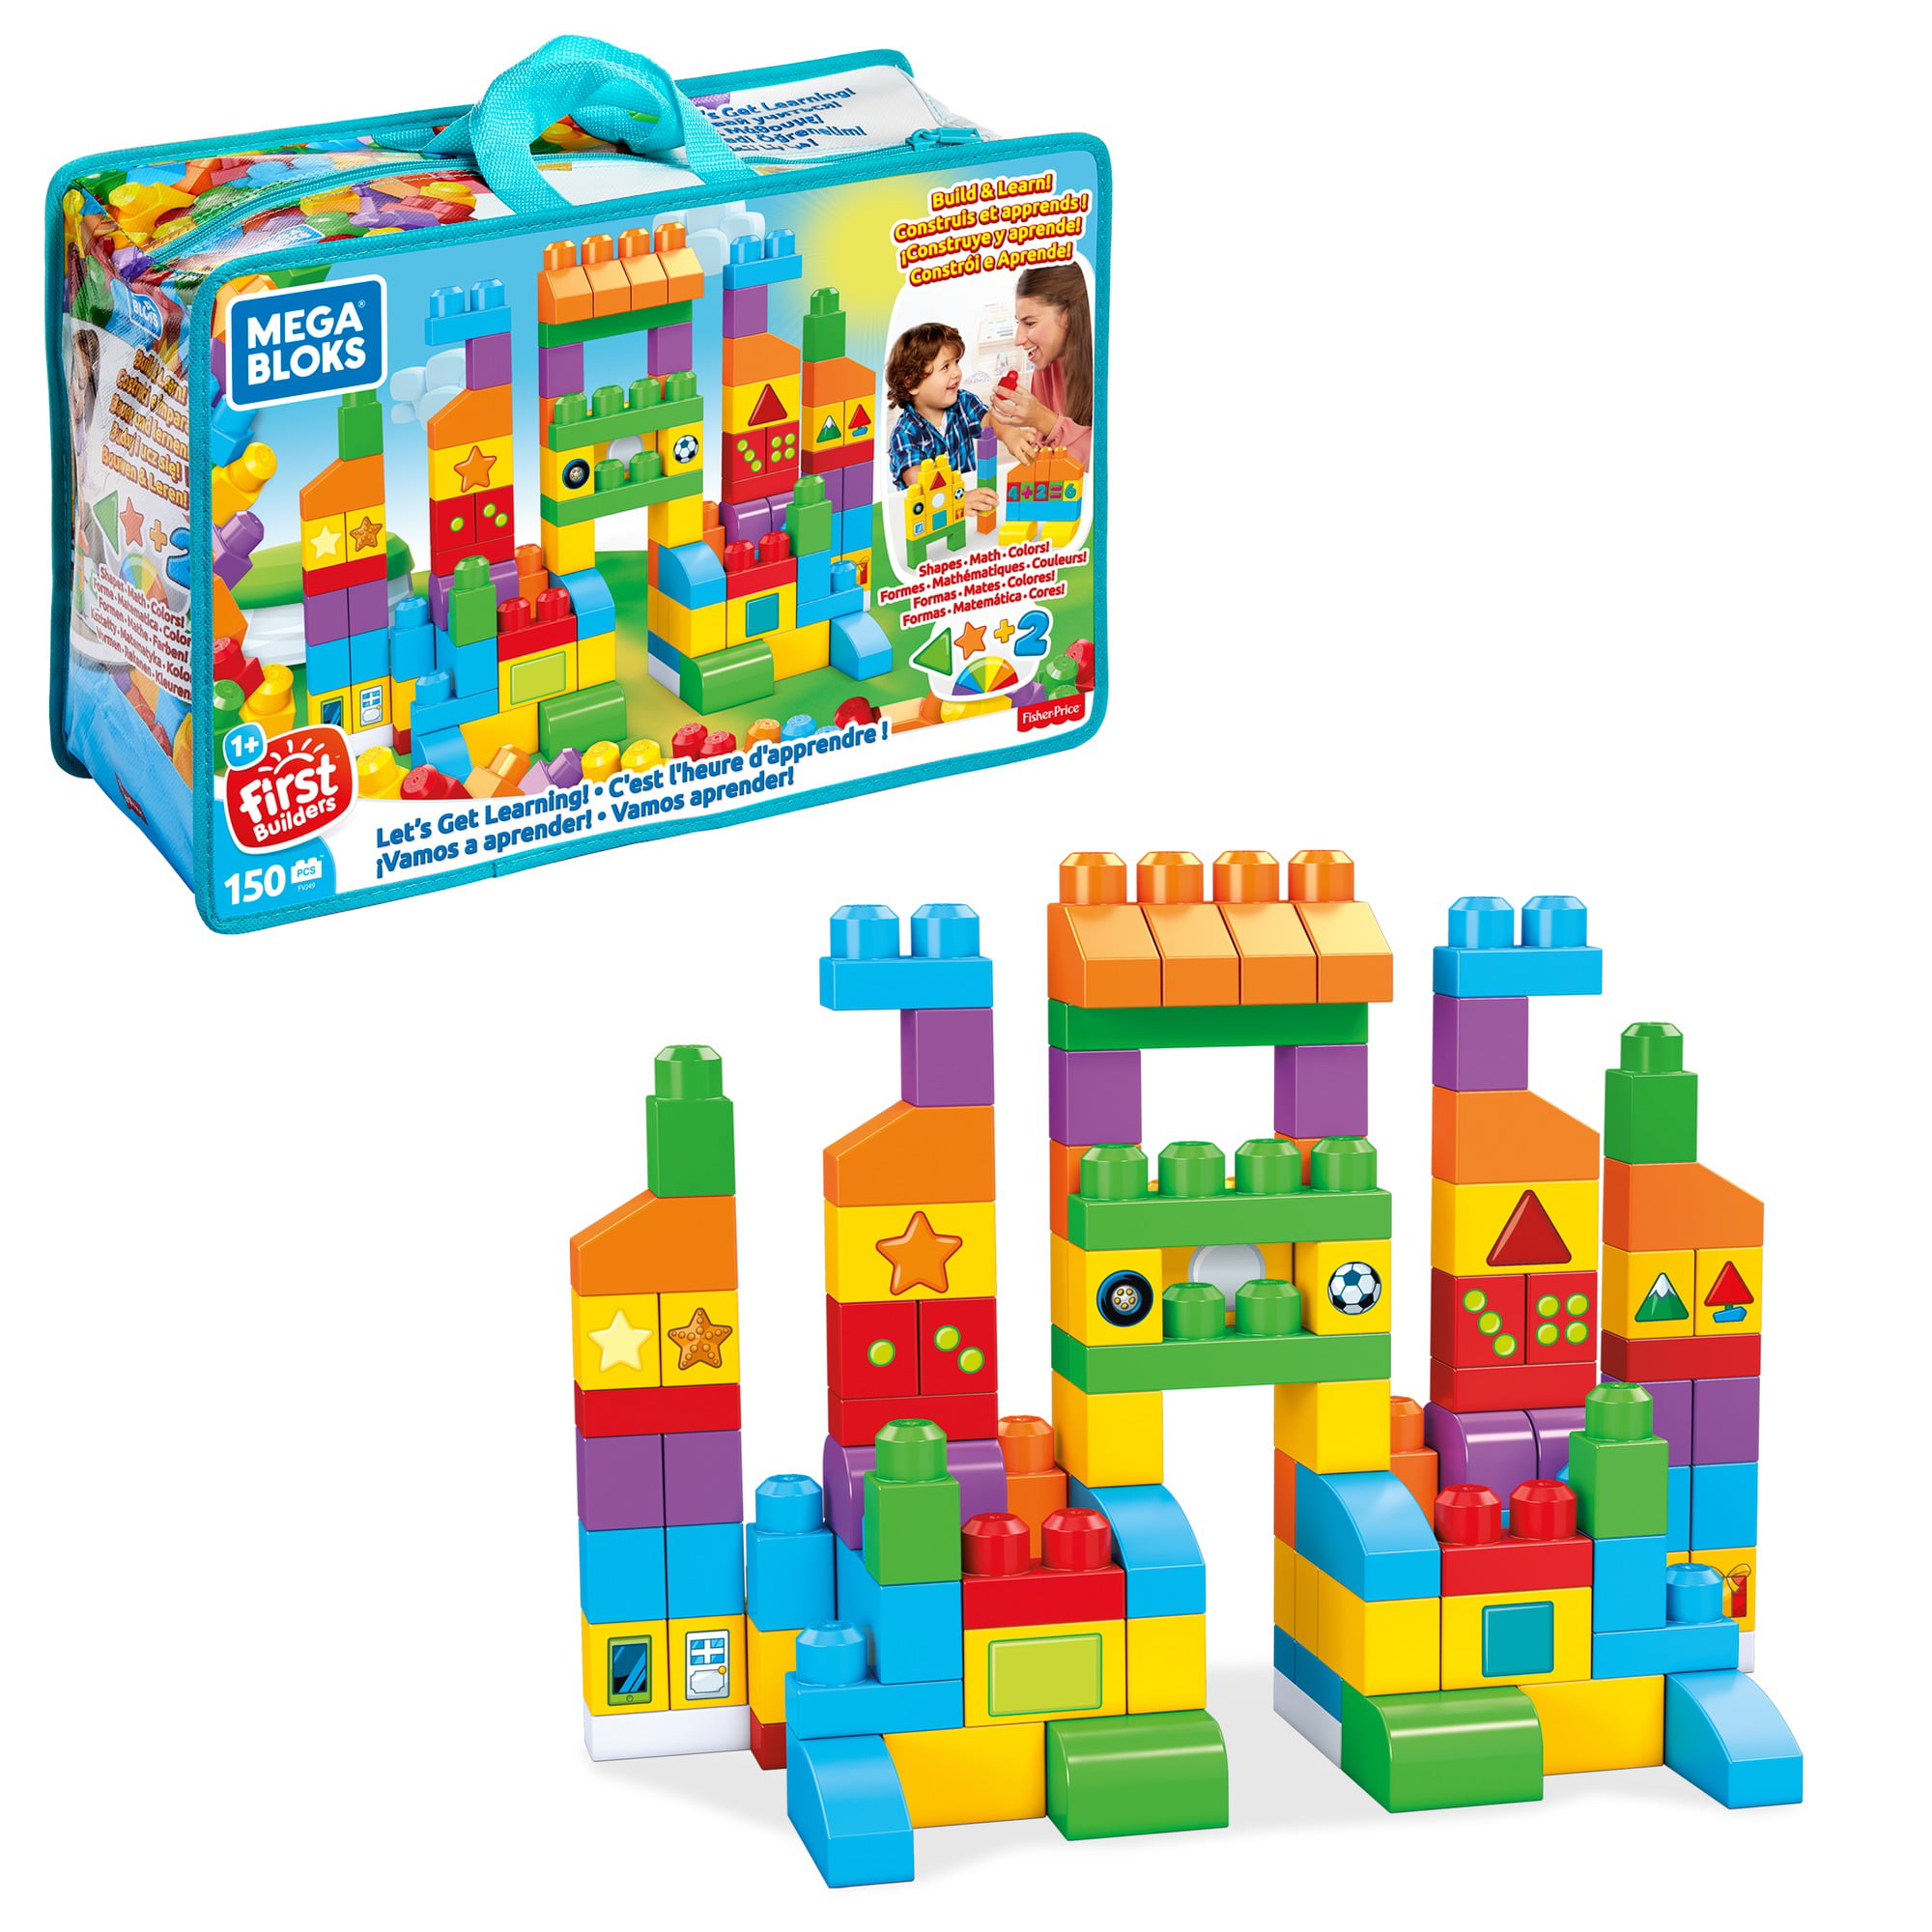 Mega Bloks First Builders Let's Get Learning! with Big Building Blocks, Building Toys for Toddlers (150 Pieces)